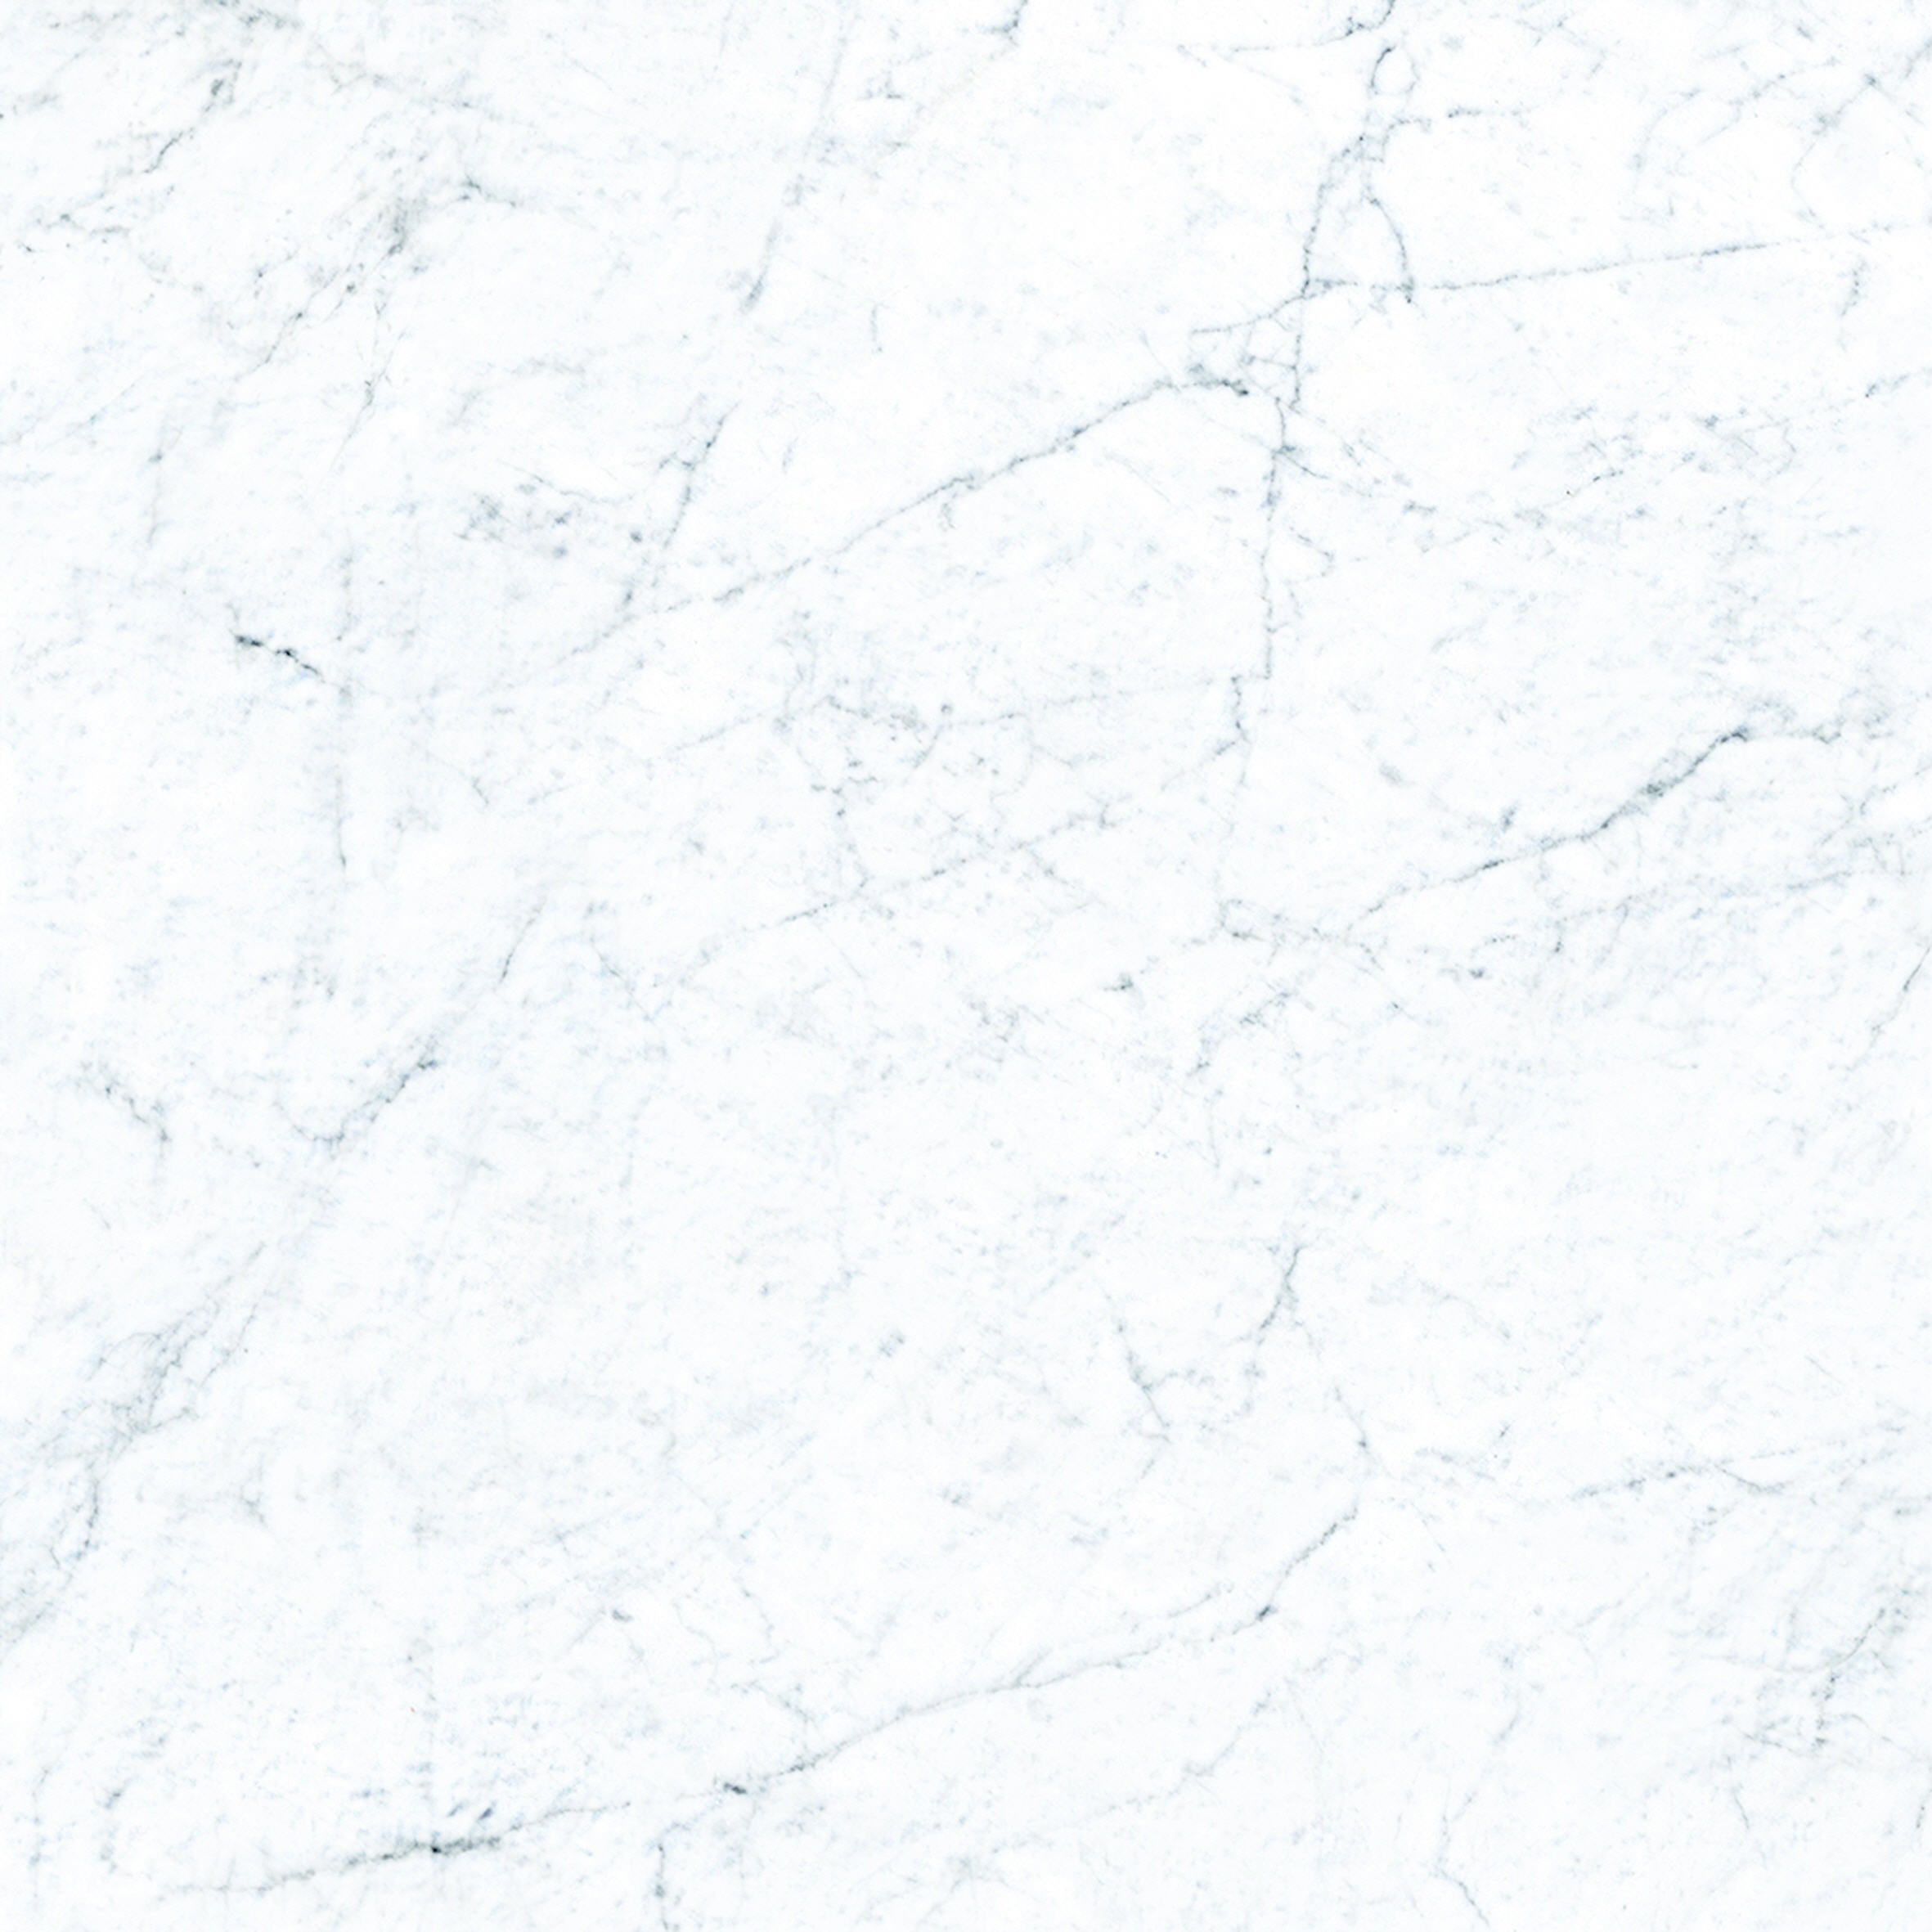 landmark frontier20 marble michelangelo white paver tile 24x24x20mm matte rectified porcelain tile distributed by surface group international